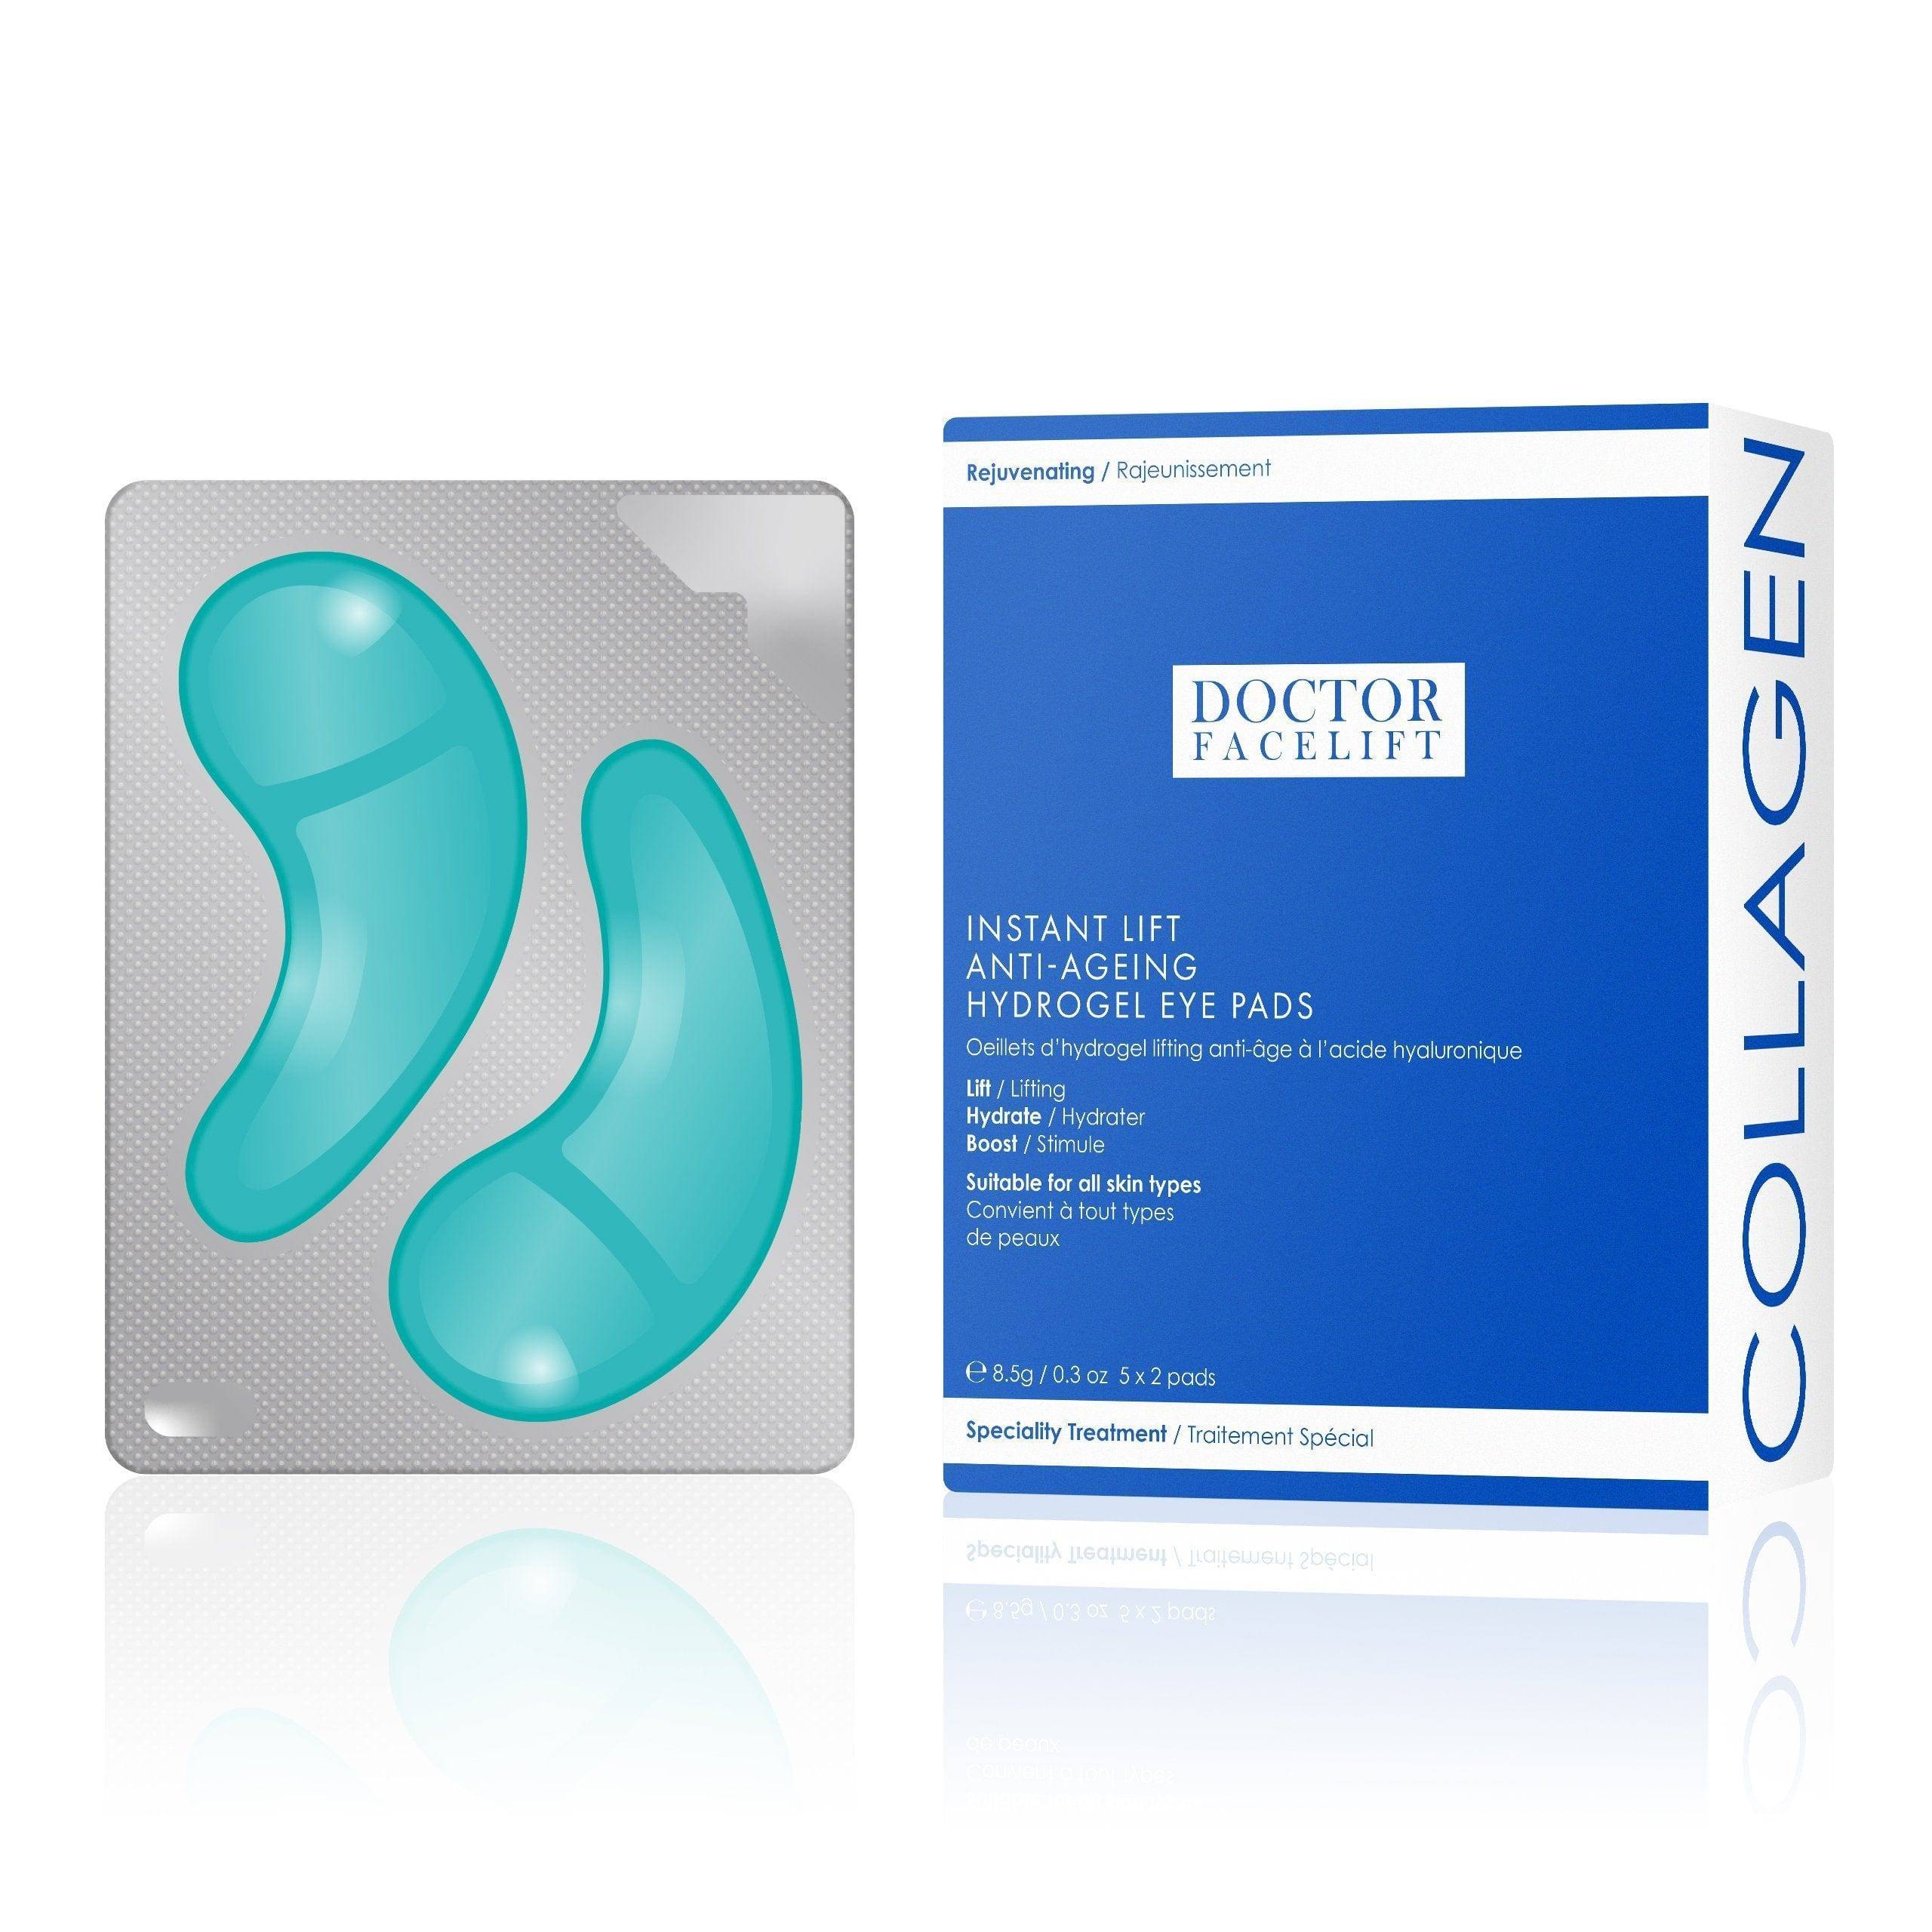 Doctor Facelift Instant Lift Anti-Ageing Hydrogel Eye Pads - skinChemists